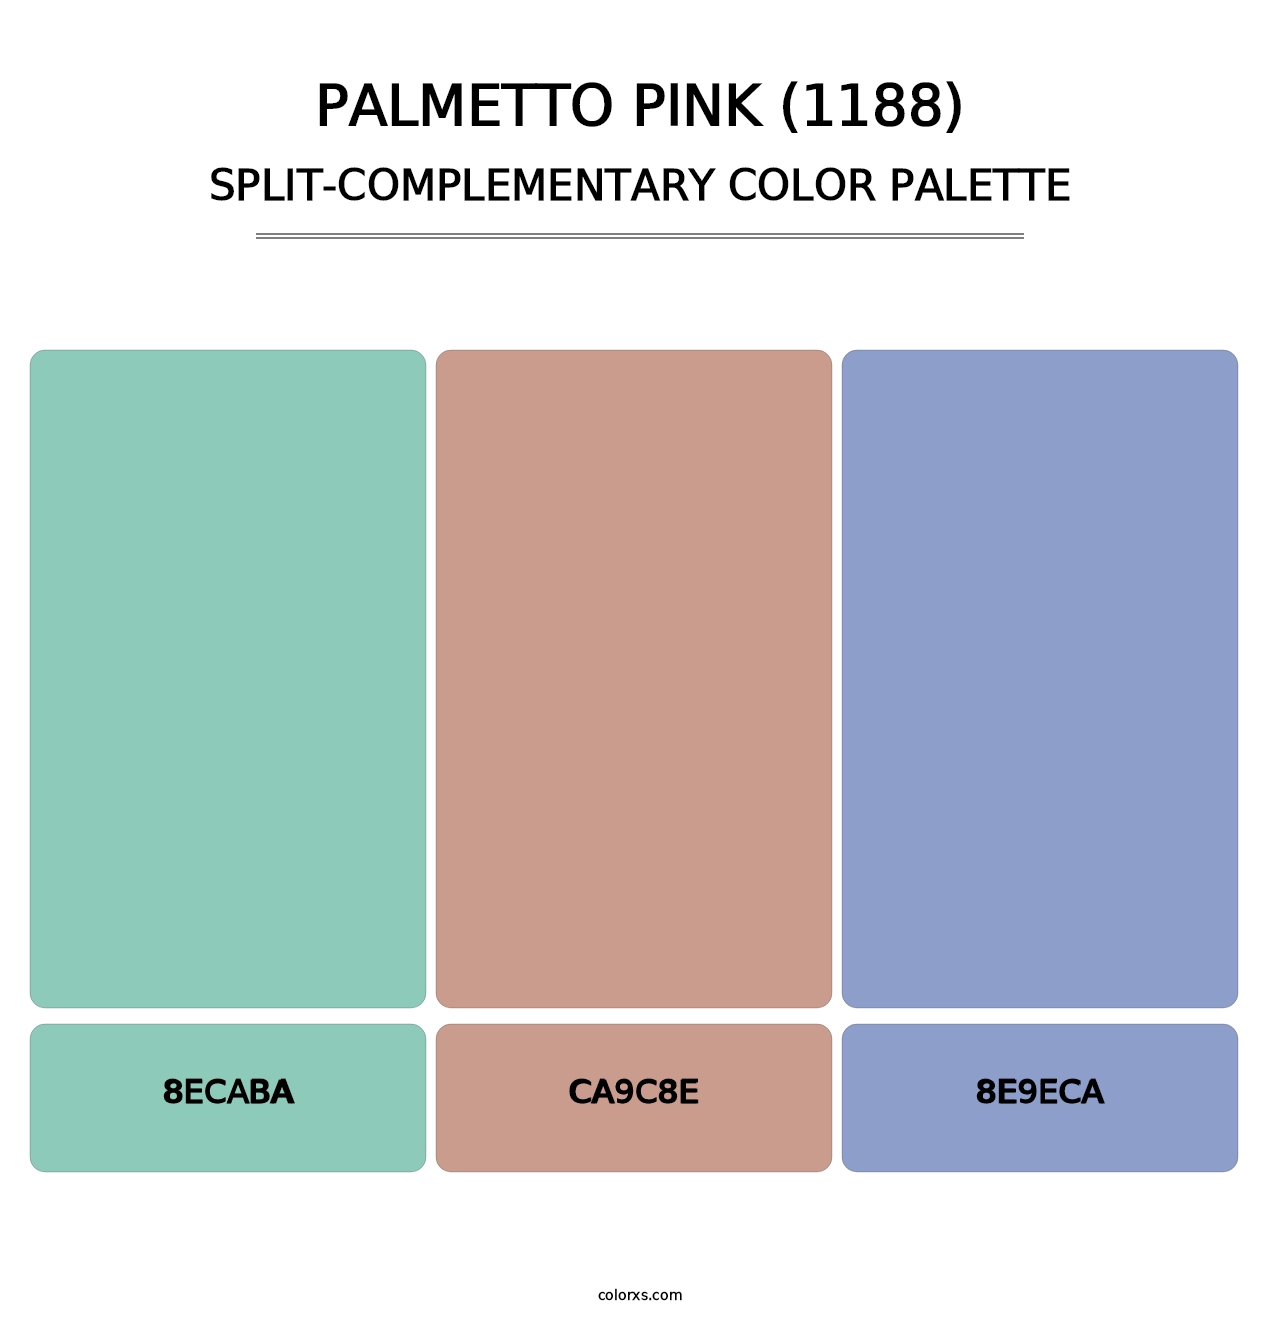 Palmetto Pink (1188) - Split-Complementary Color Palette